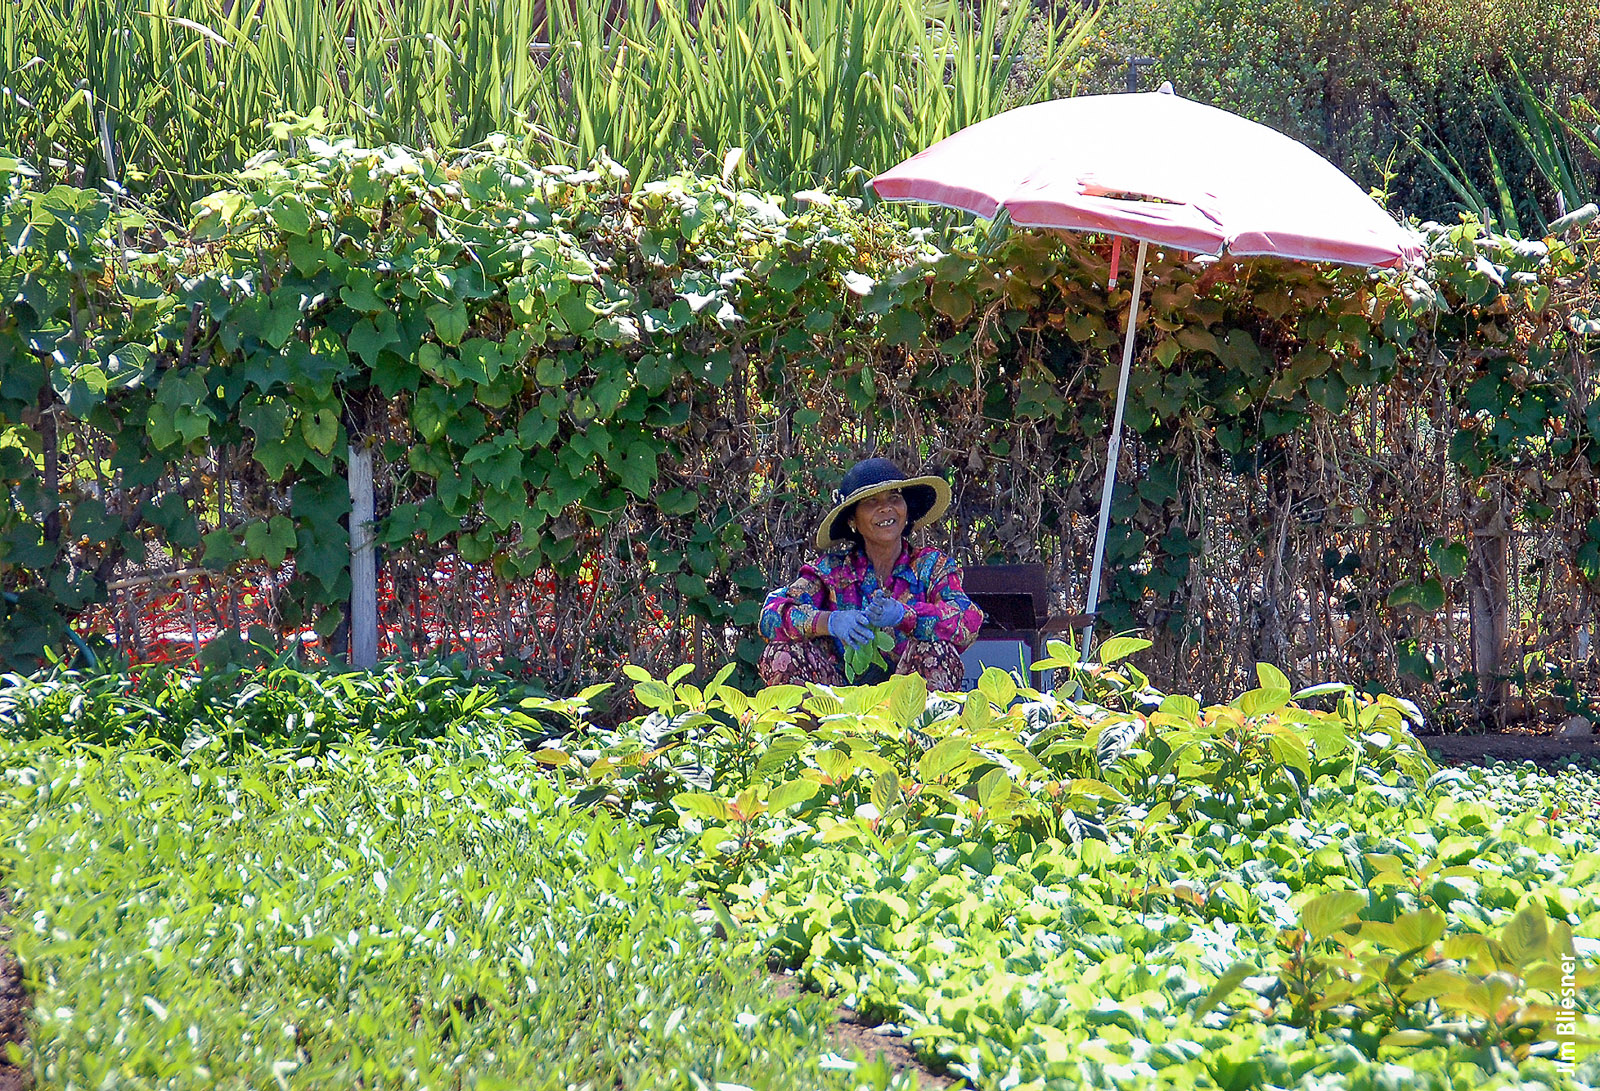 A gardener works in the shade at Tijuana River Valley Community Garden. The study survey collected information on what factors draw people to community gardening, including social, well-being and economic reasons.